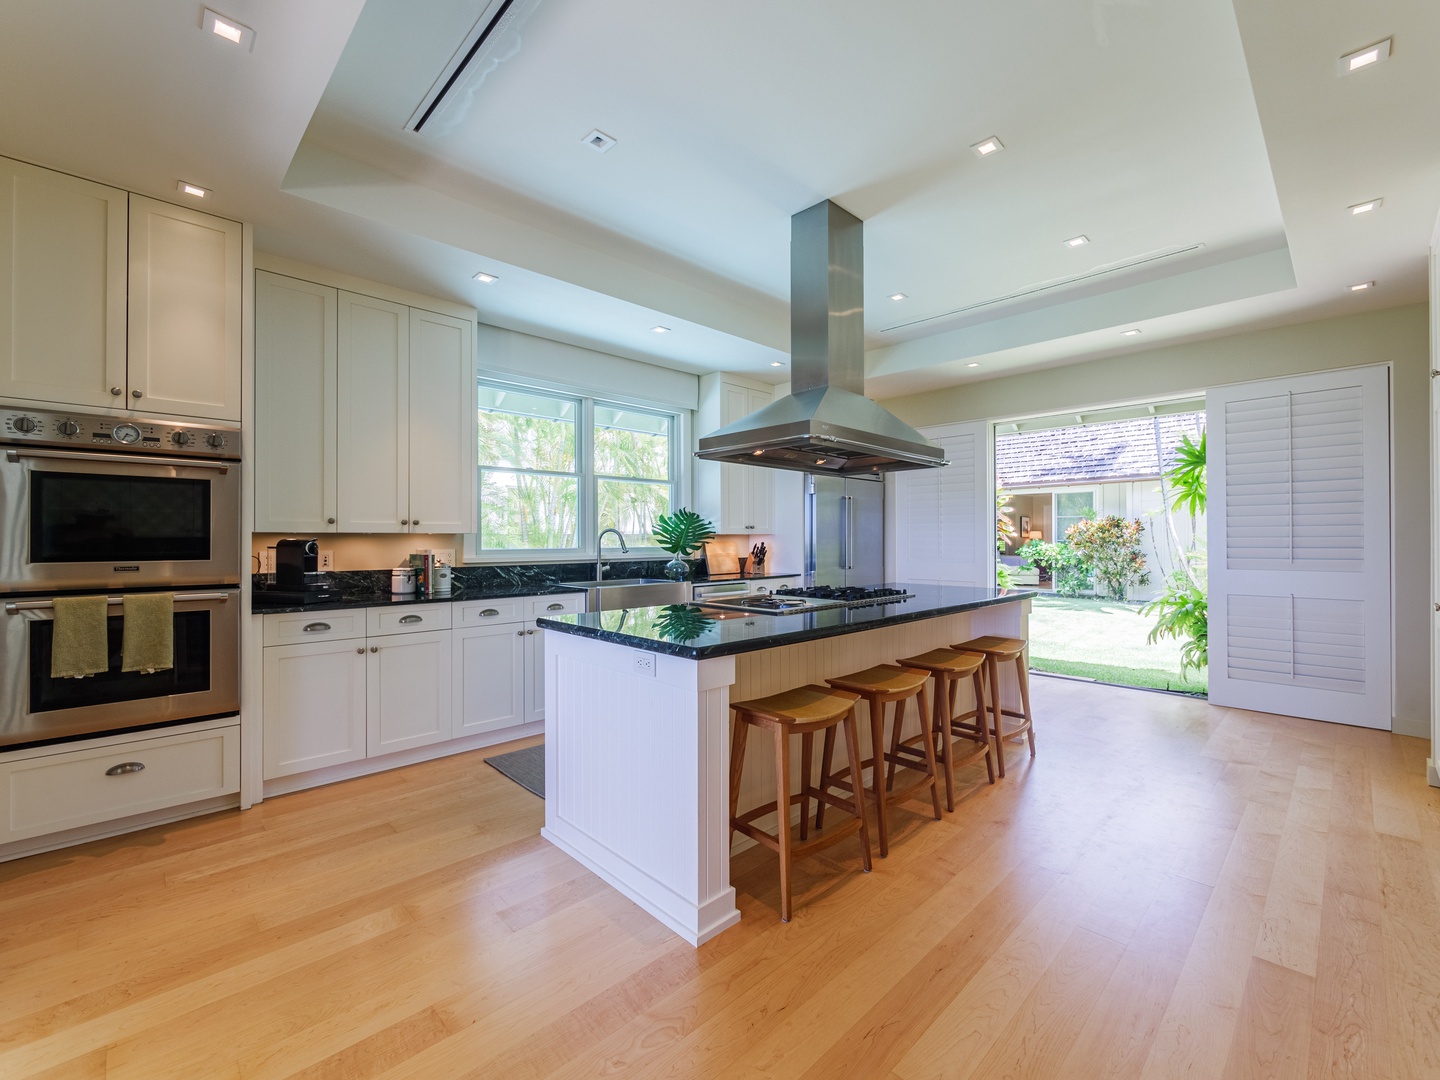 Honolulu Vacation Rentals, Paradise Beach Estate - Dive into culinary adventures in our spacious kitchen area, where ample space meets modern functionality for all your cooking endeavors.